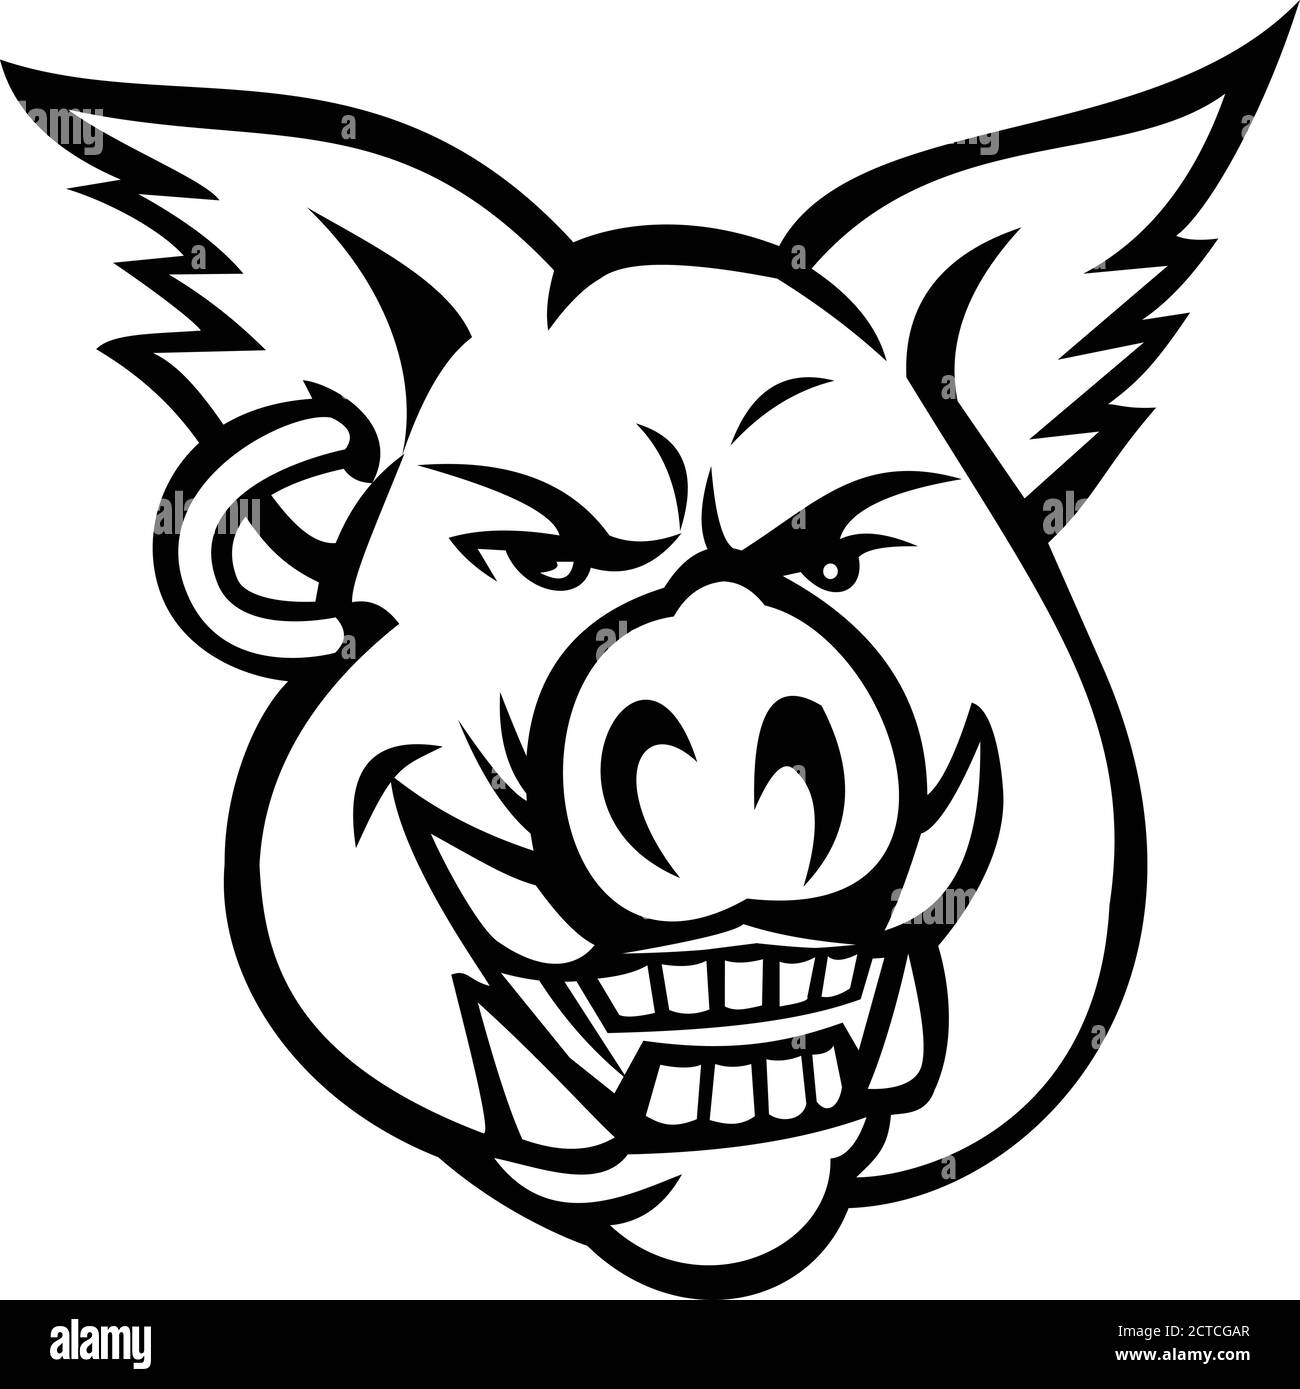 Mascot black and white illustration of head of a pink wild pig, boar or hog wearing an earring smiling grinning viewed from front on isolated backgrou Stock Vector